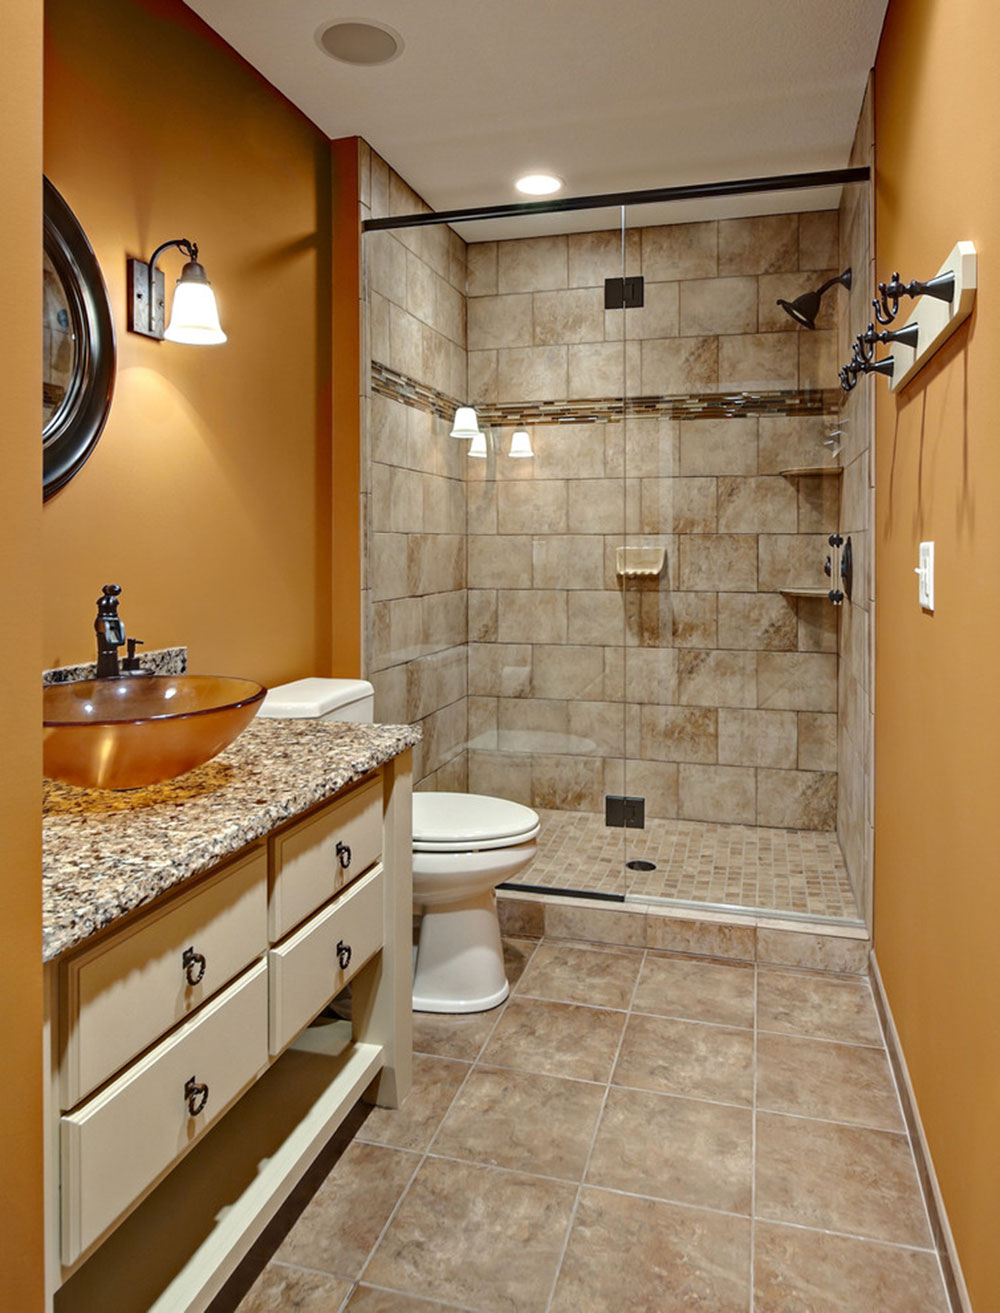 Cost To Add A Bathroom In The Basement, Basement Bathroom Remodel Cost